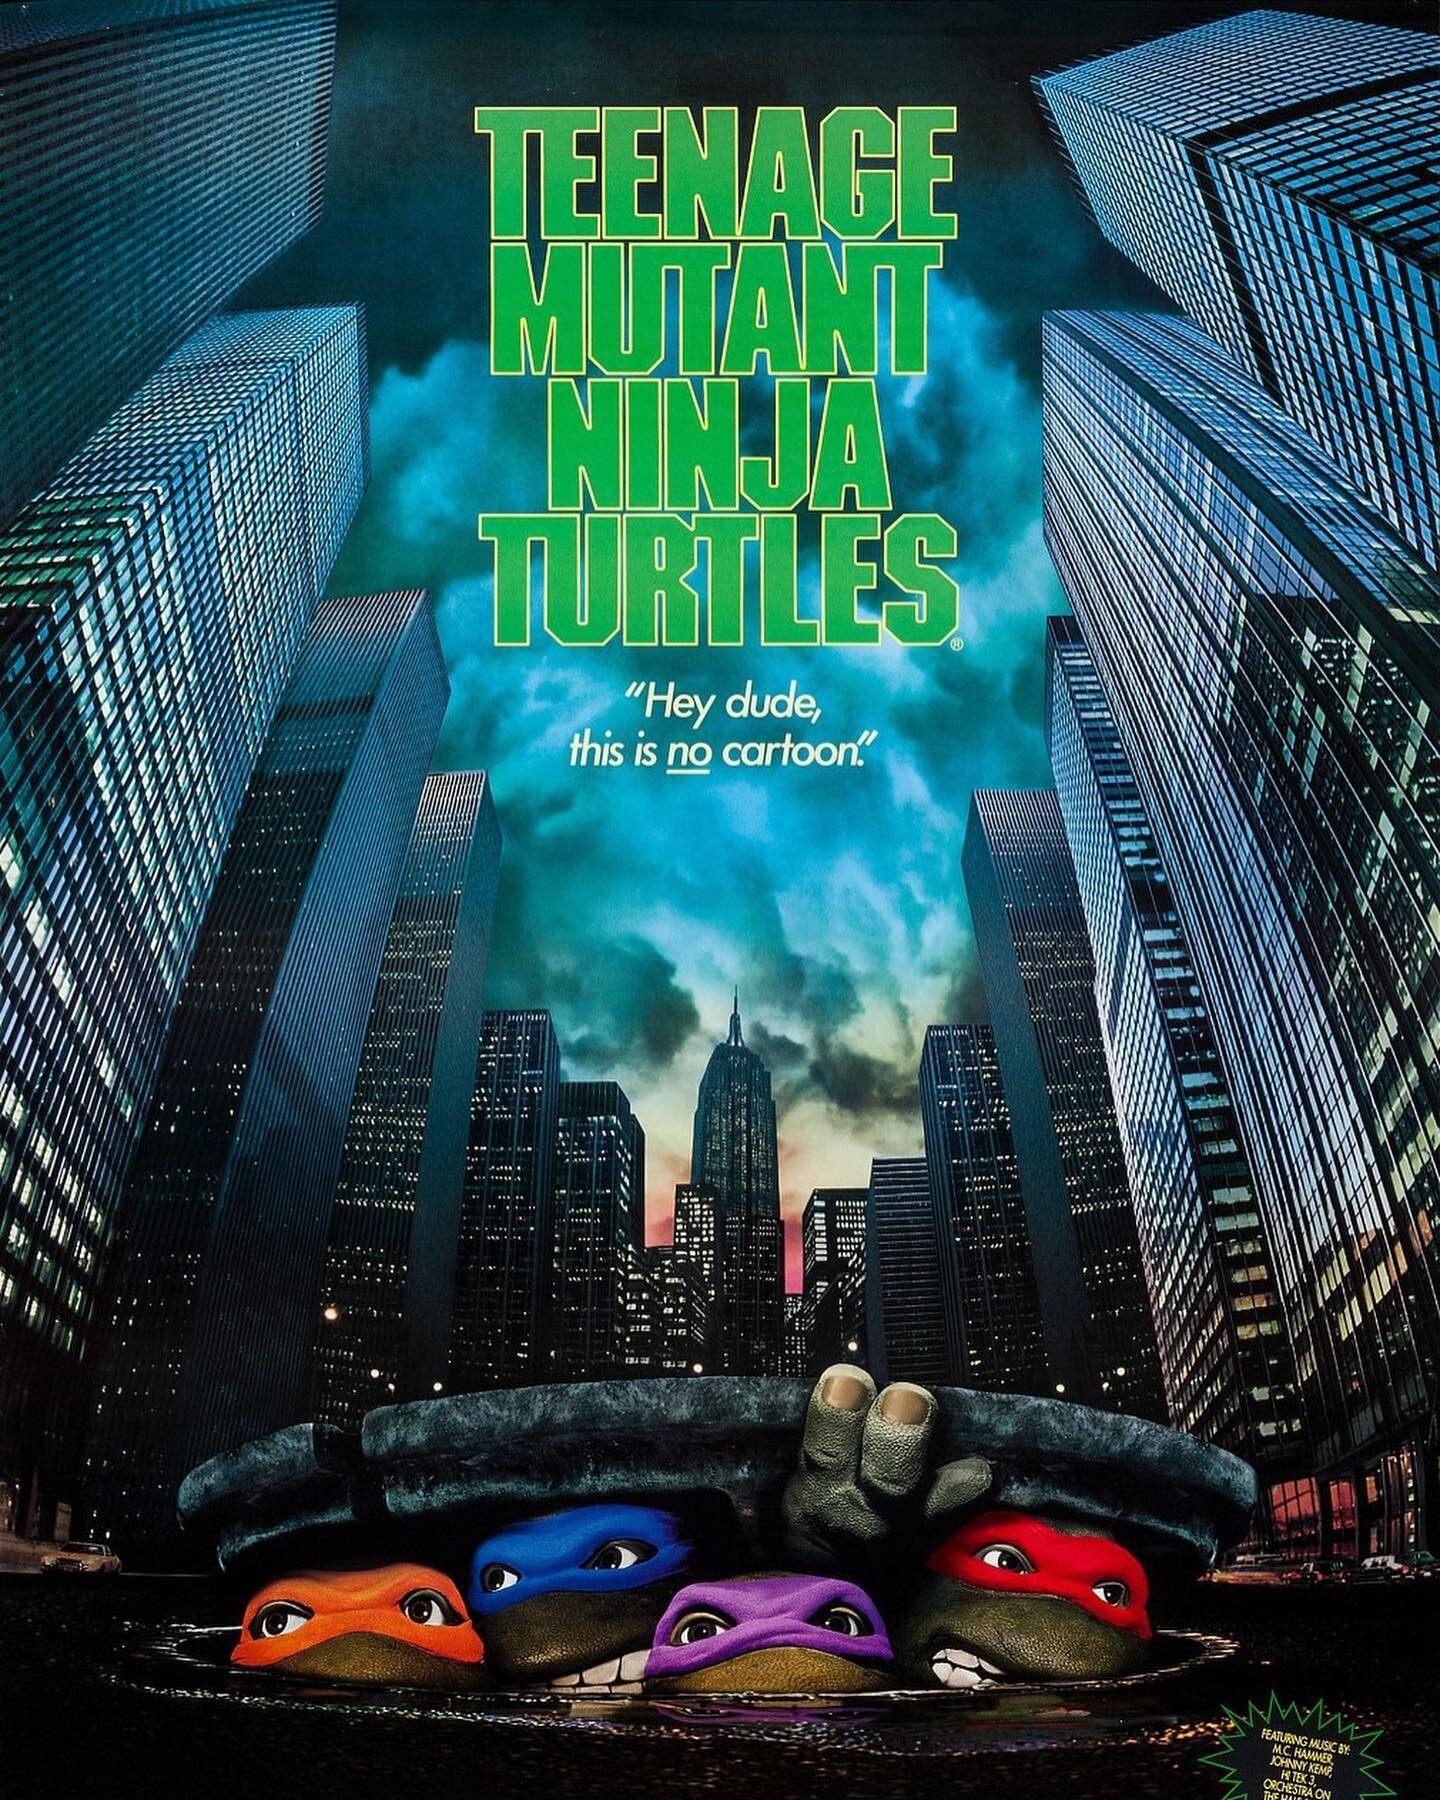 This week we visited one of the most important parts of our lives, the original Teenage Mutant Ninja Turtles movie. Rewatching it was crazy. If it&rsquo;s been a while or you&rsquo;ve just never seen it, it really is standing the test of time. It&rsq